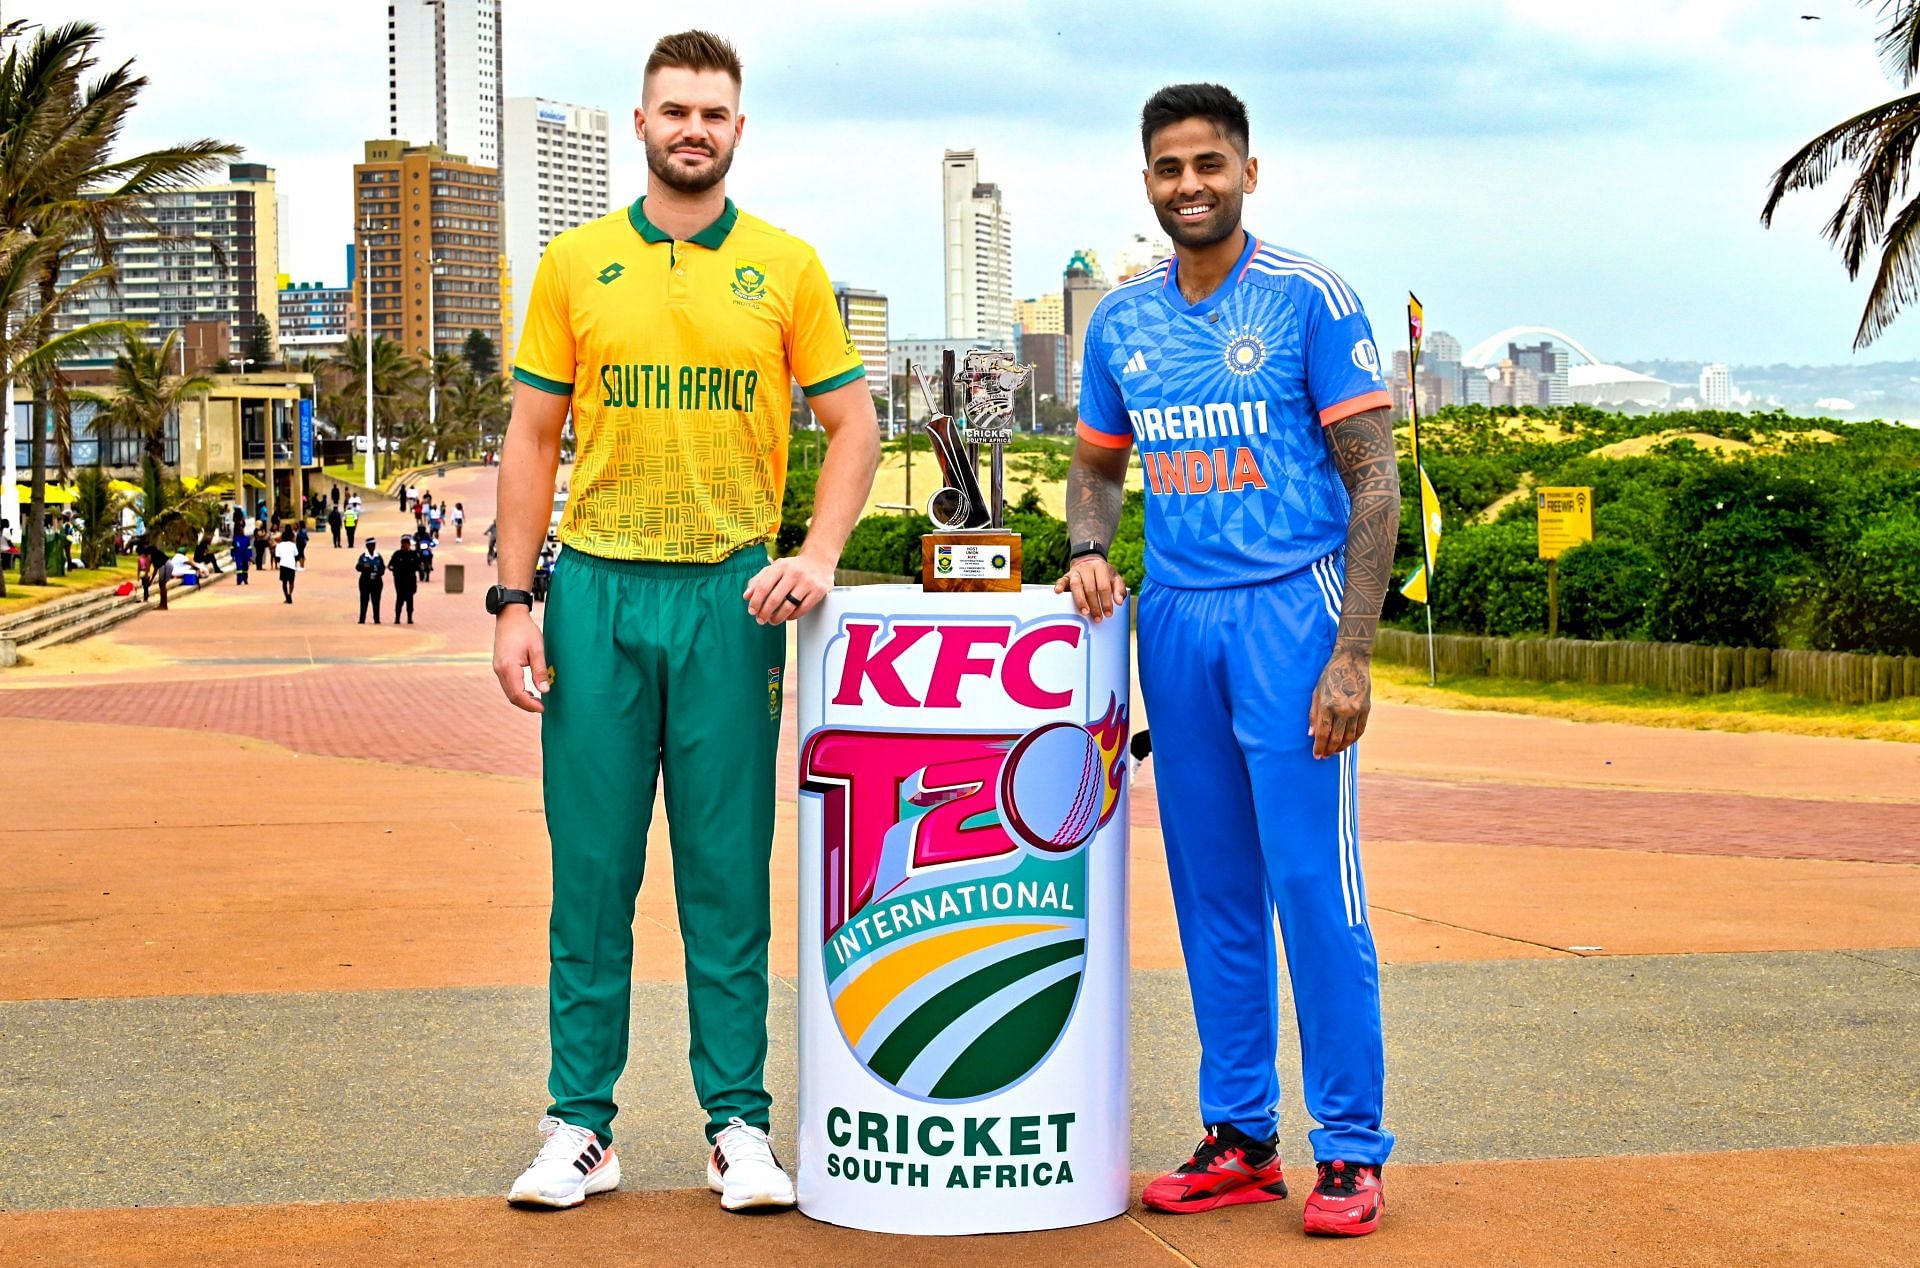 South Africa vs India T20I Dream11 Fantasy Suggestions